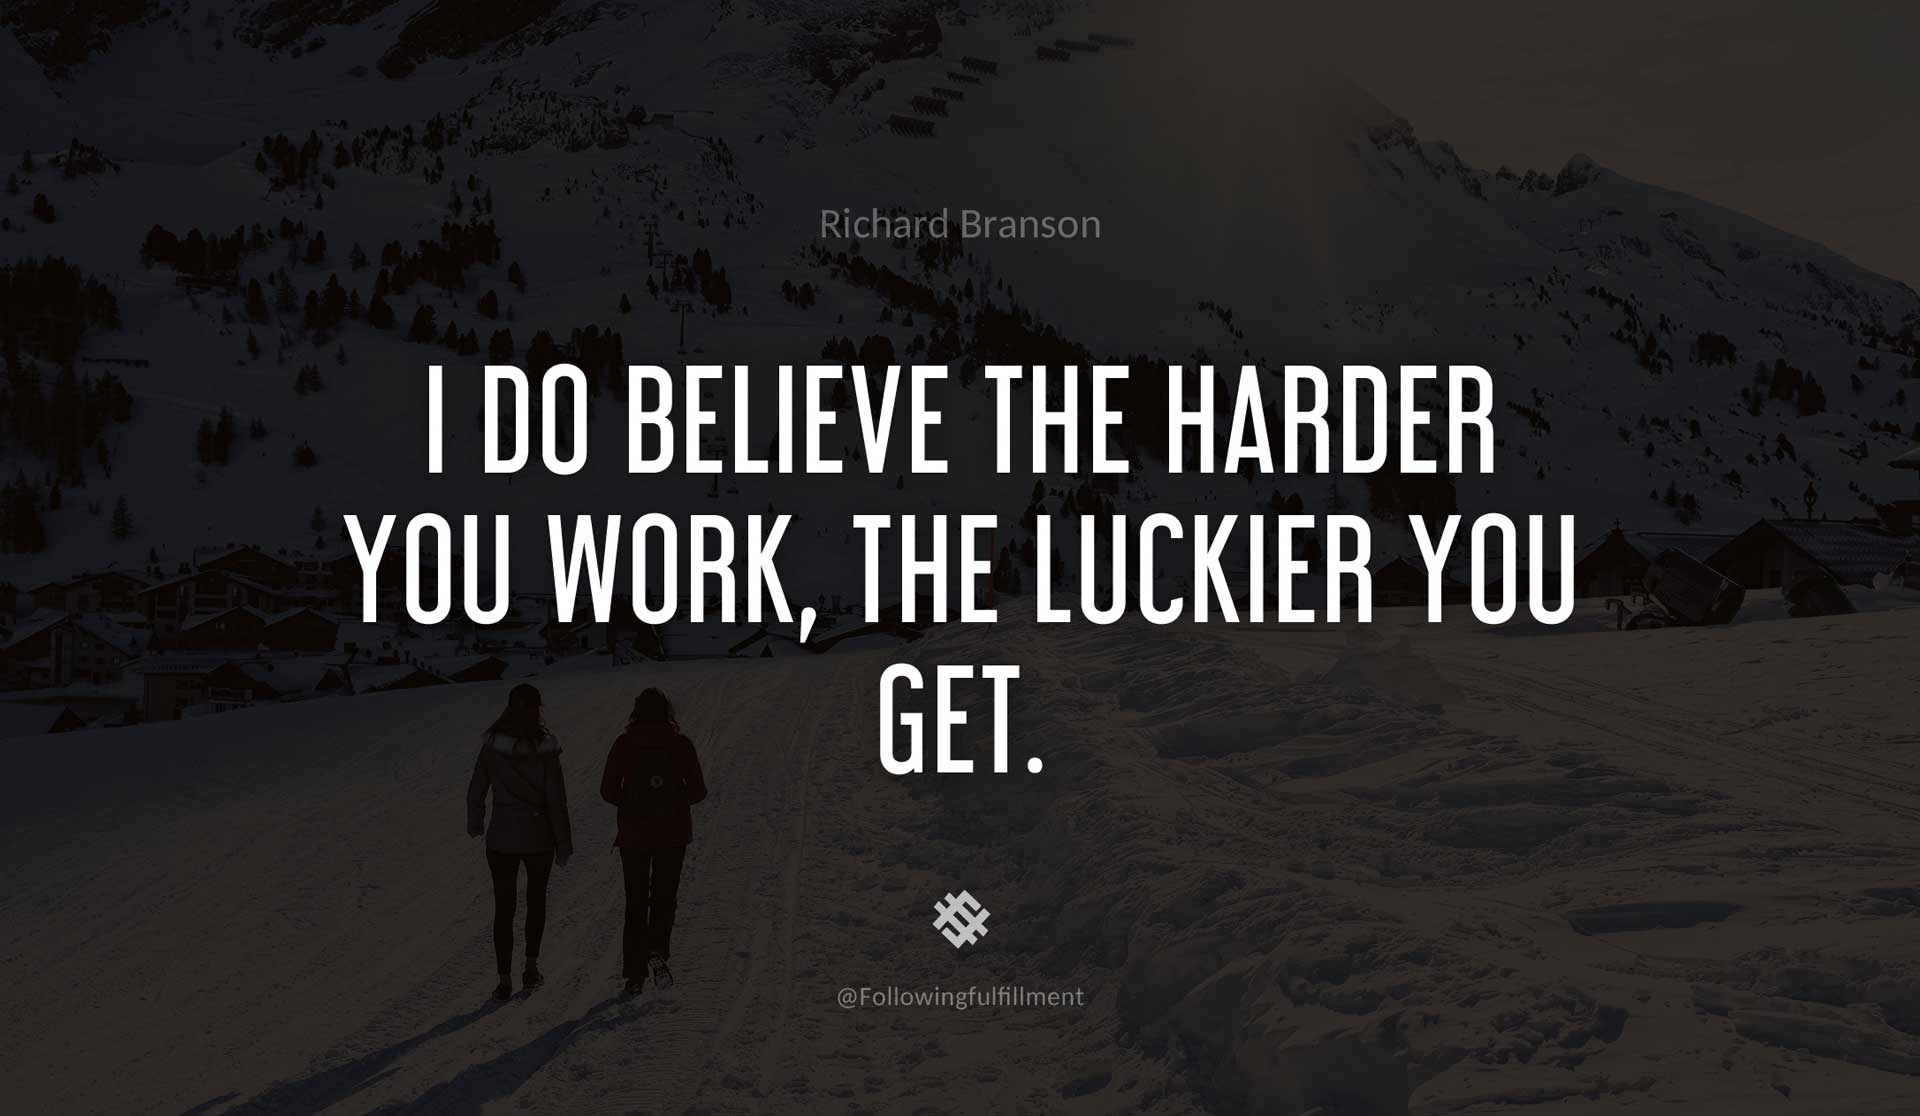 I-do-believe-the-harder-you-work,-the-luckier-you-get.-RICHARD-BRANSON-Quote.jpg